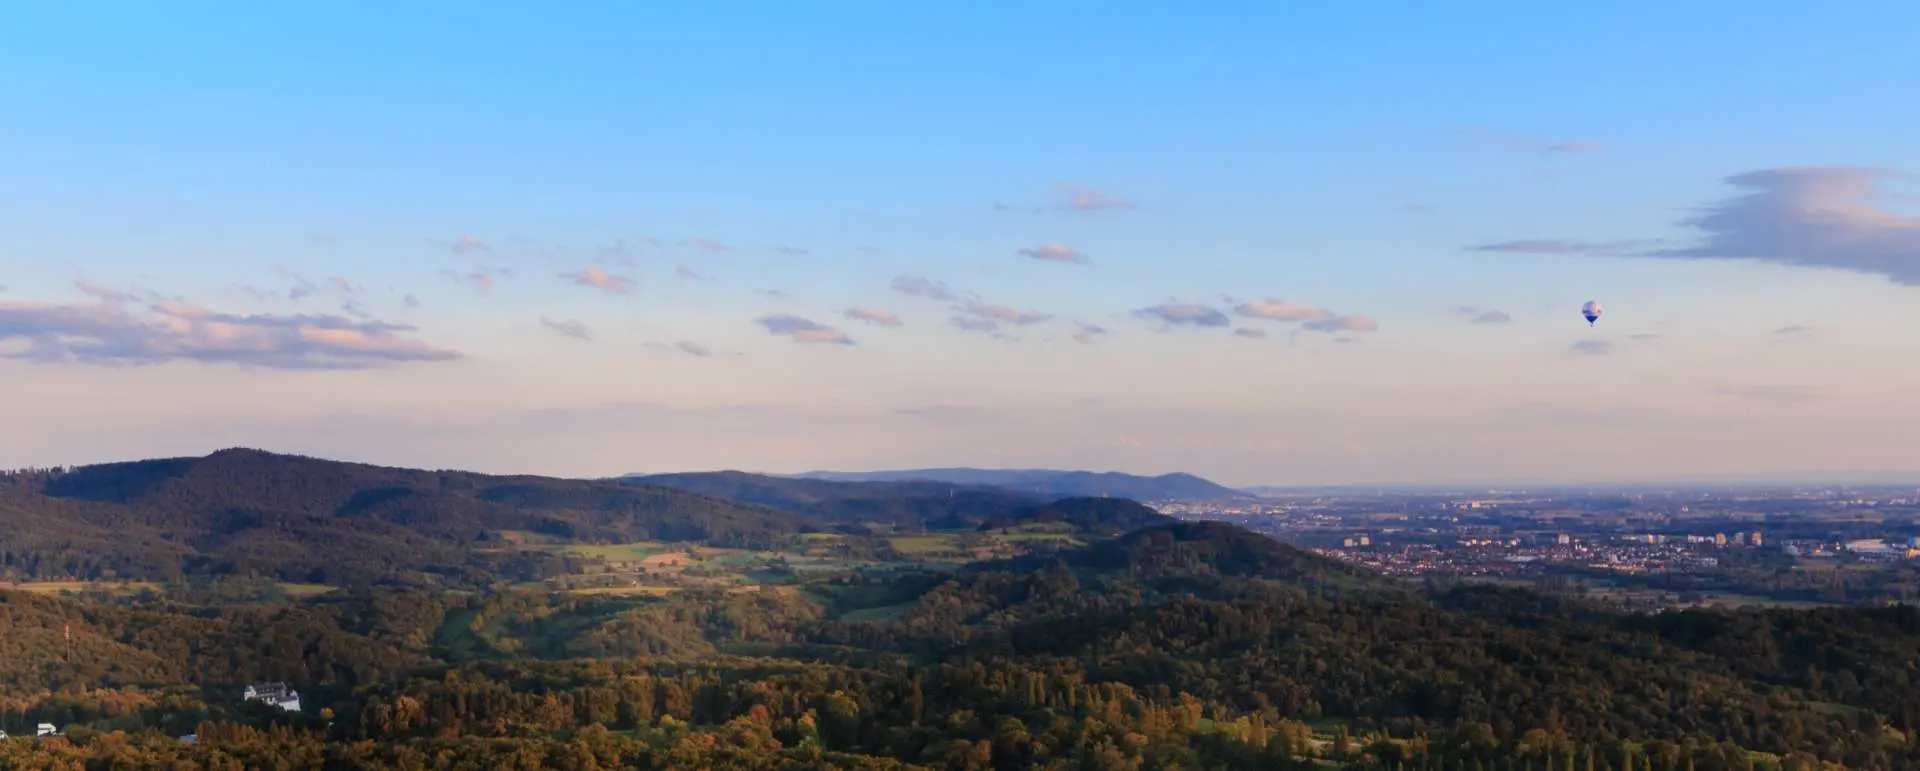 Constituency of Odenwald - the destination for workers